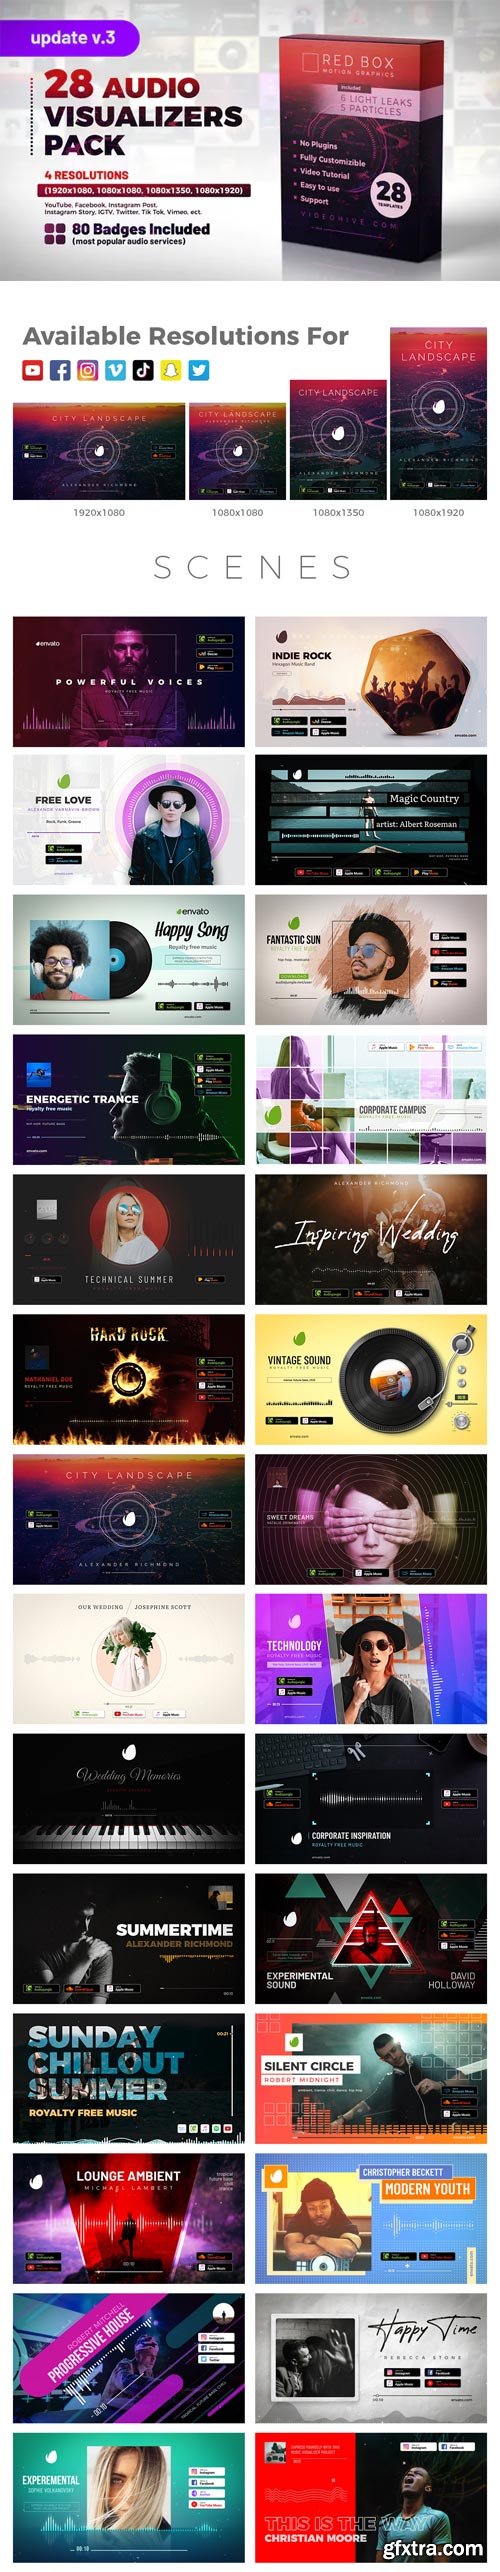 Videohive - Audio Visualizers Pack V2 - 27144986